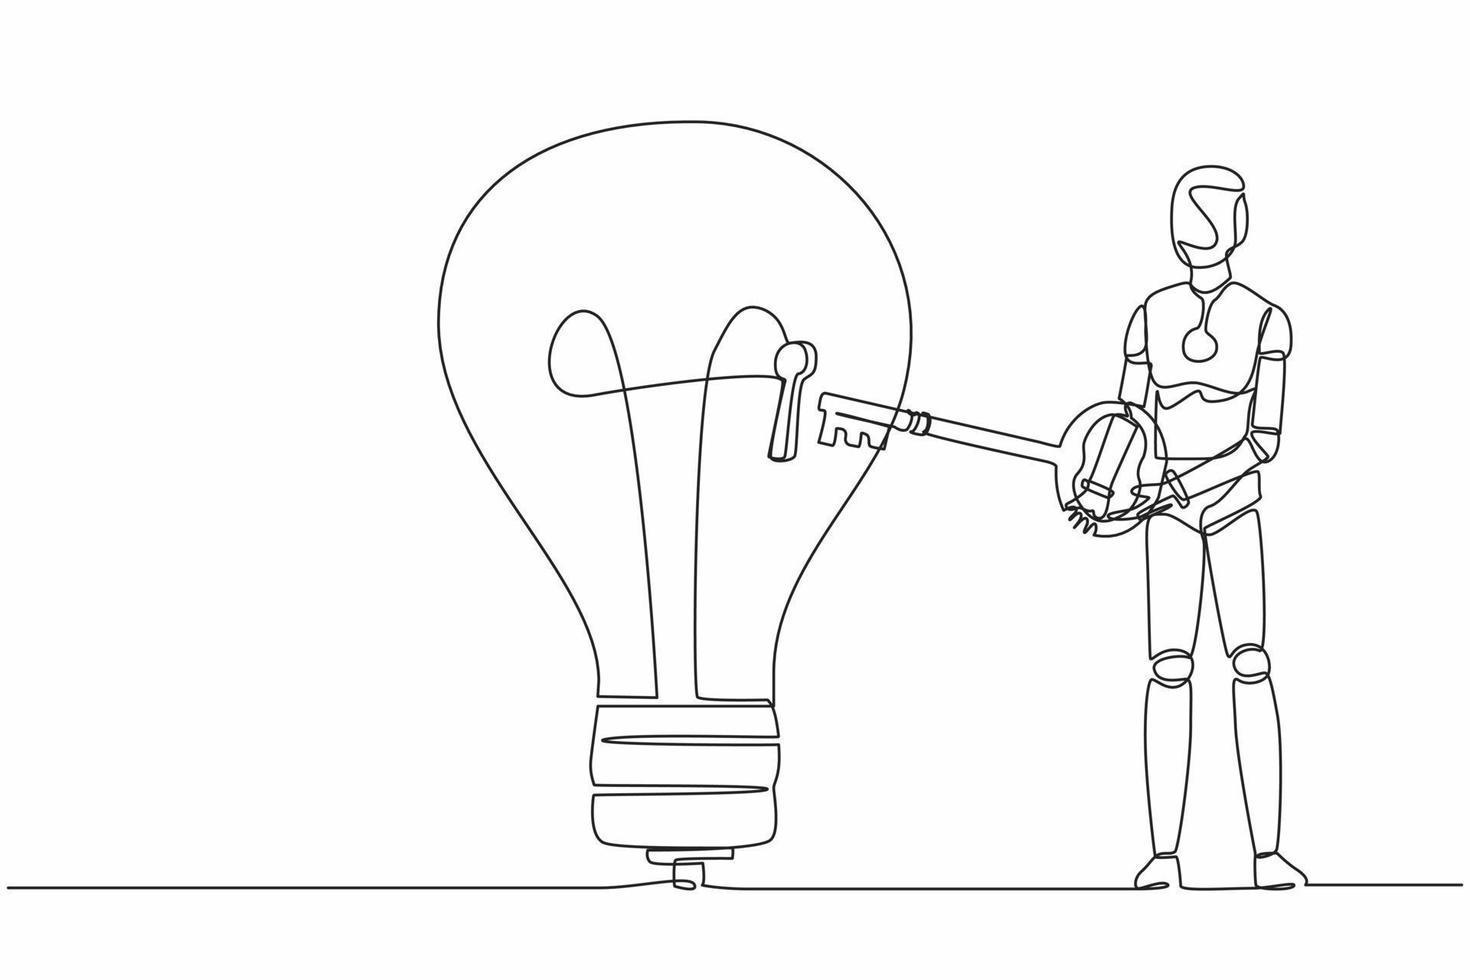 Single one line drawing robot put big key into light bulb. Unlock innovation on business idea. Future technology development. Artificial intelligence. Continuous line draw design vector illustration